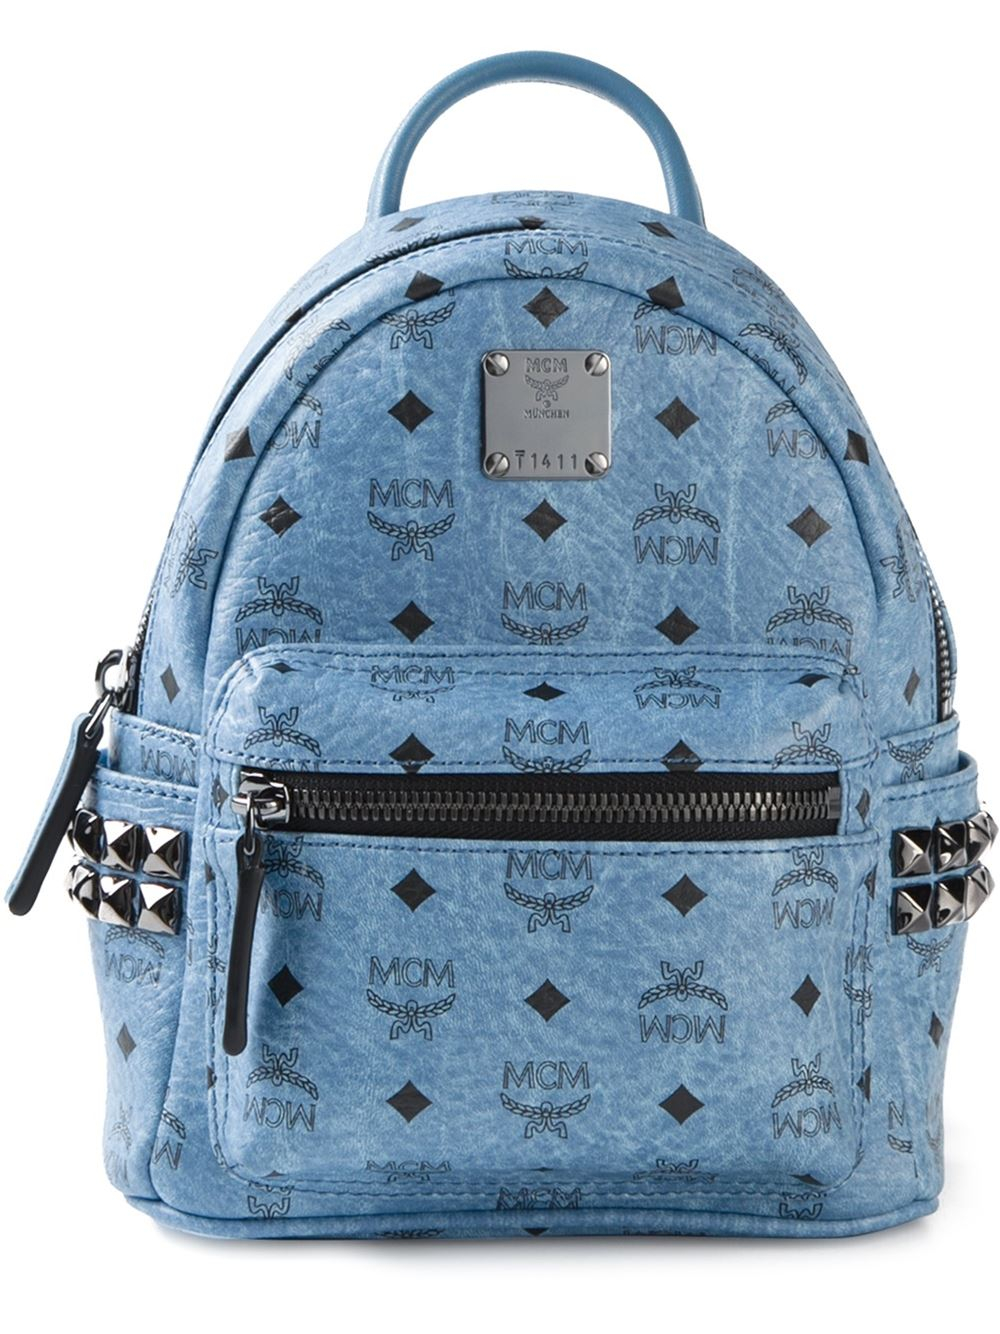 Light Blue Mcm Backpack | IUCN Water